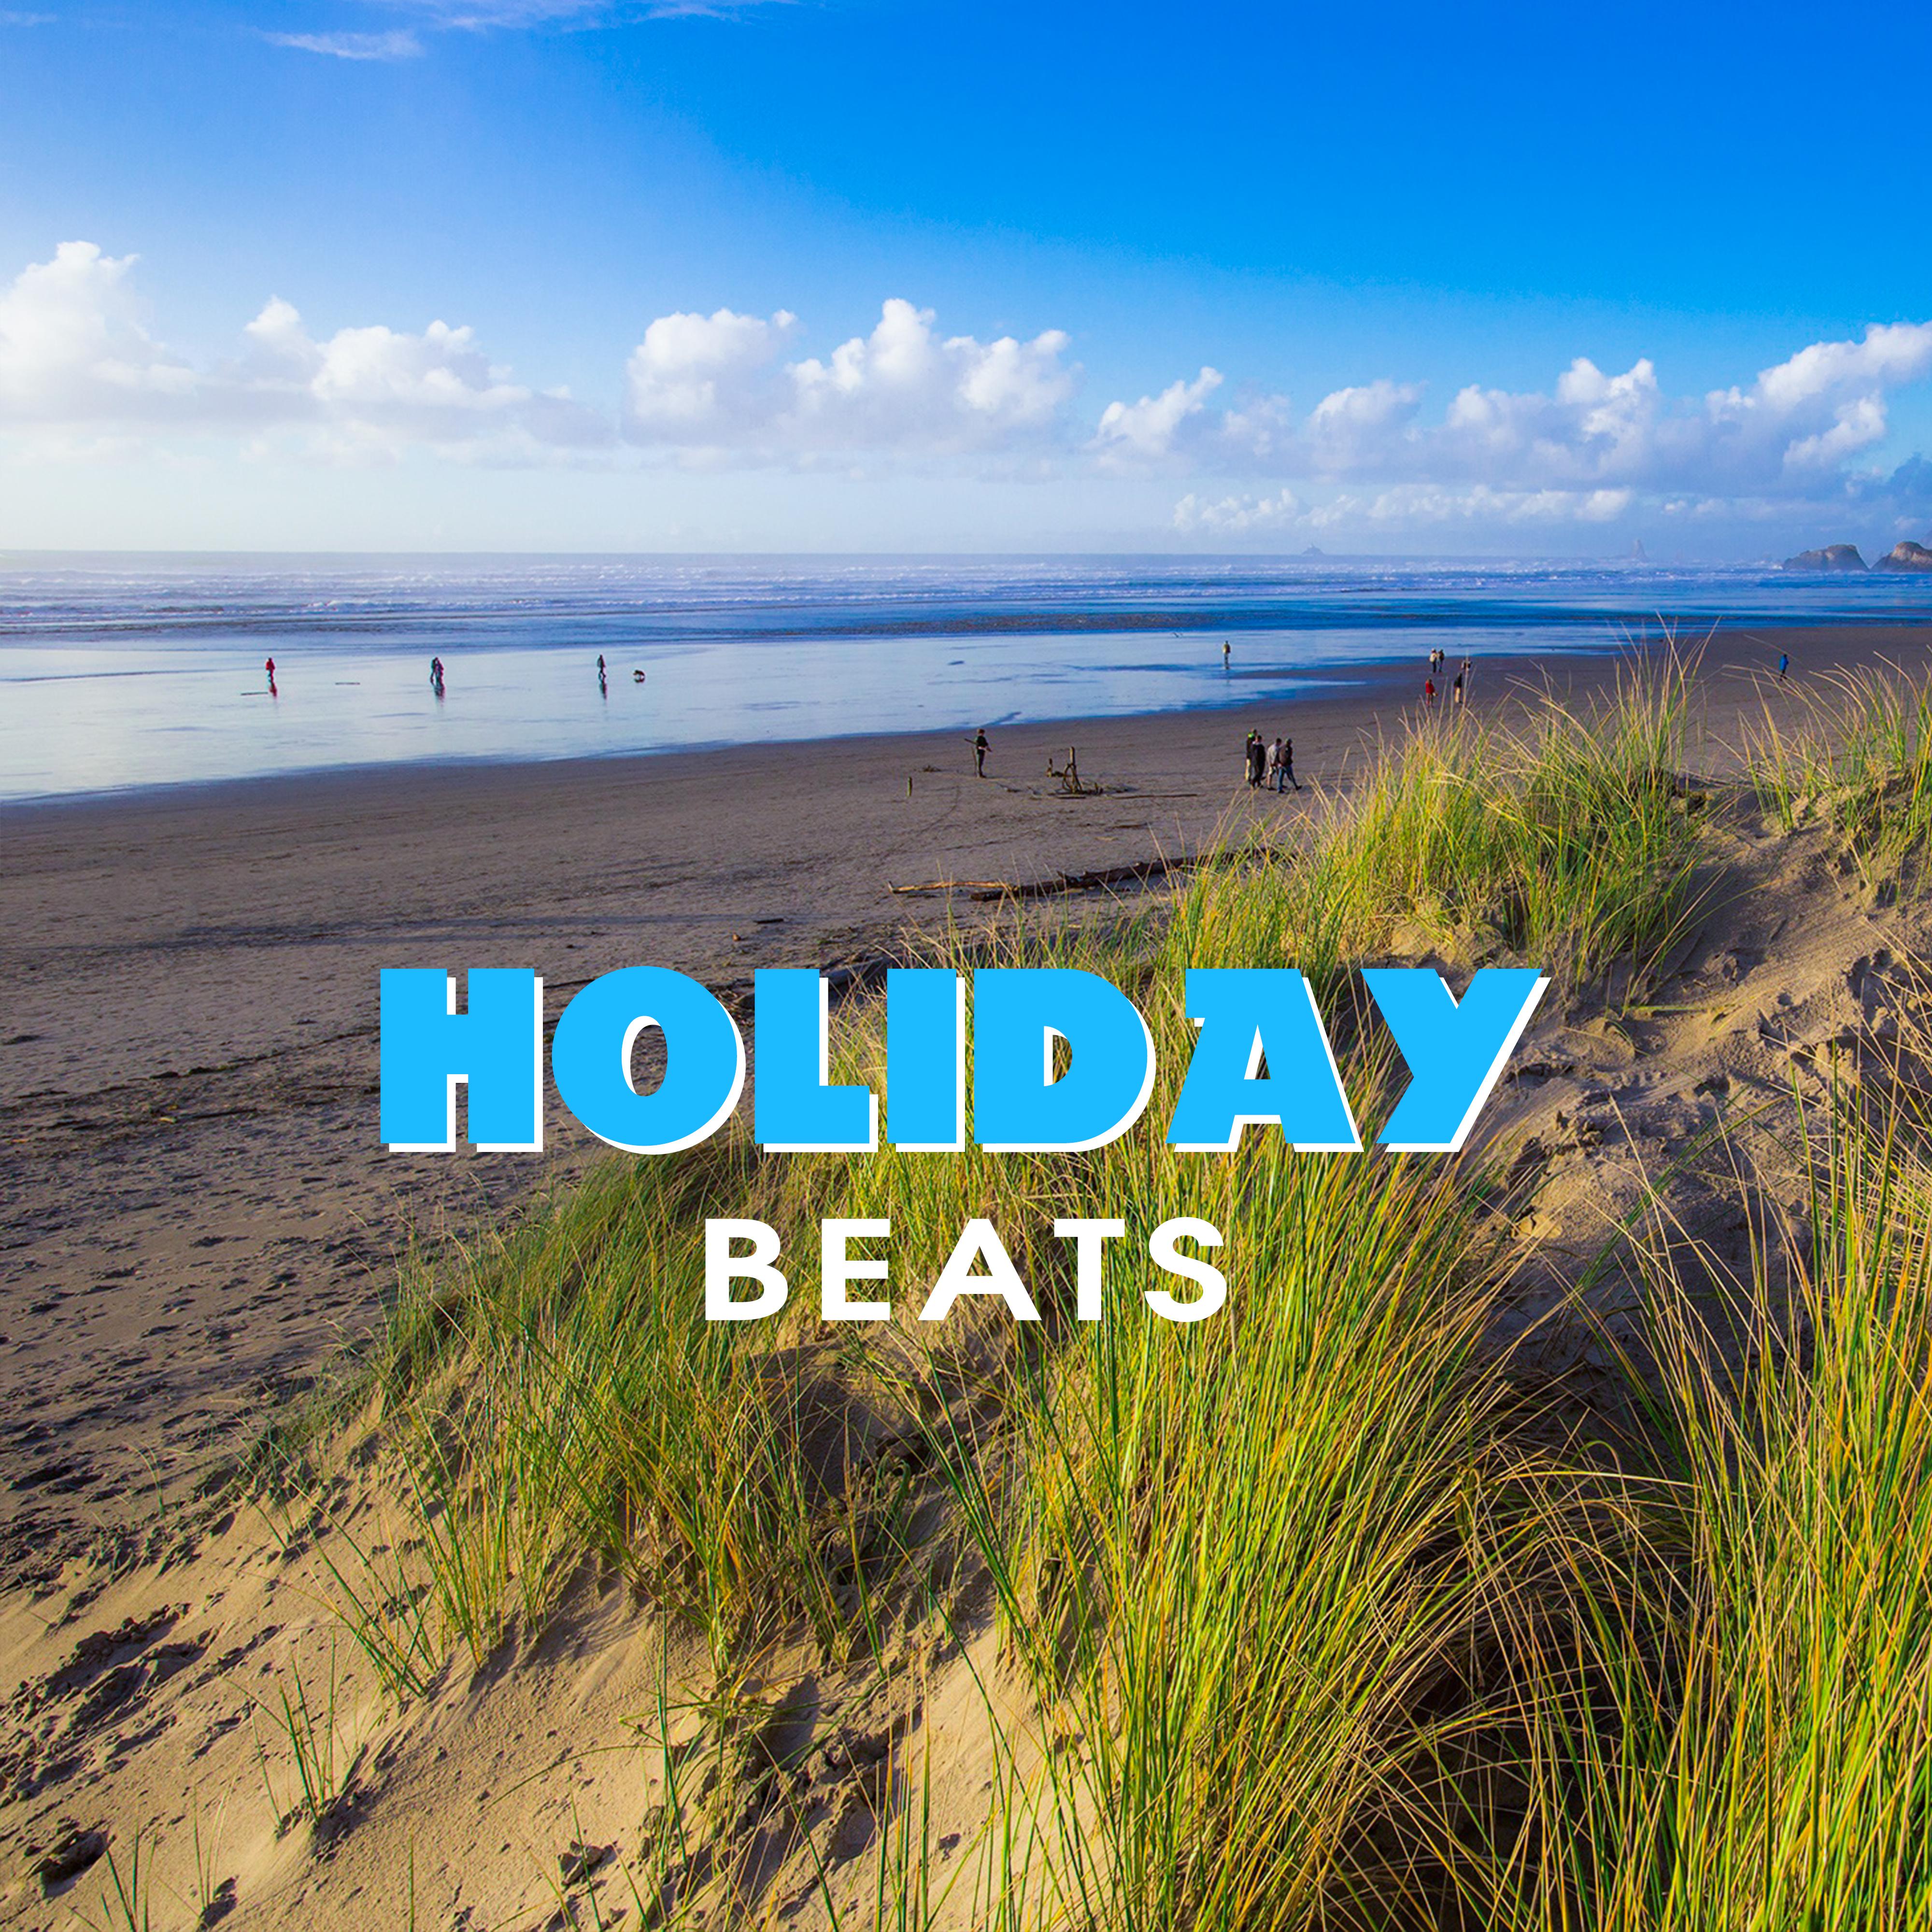 Holidays Beats – Summer Hits 2017, Chill Out Music, Lounge, Electronic Music, Ibiza Party, Dance